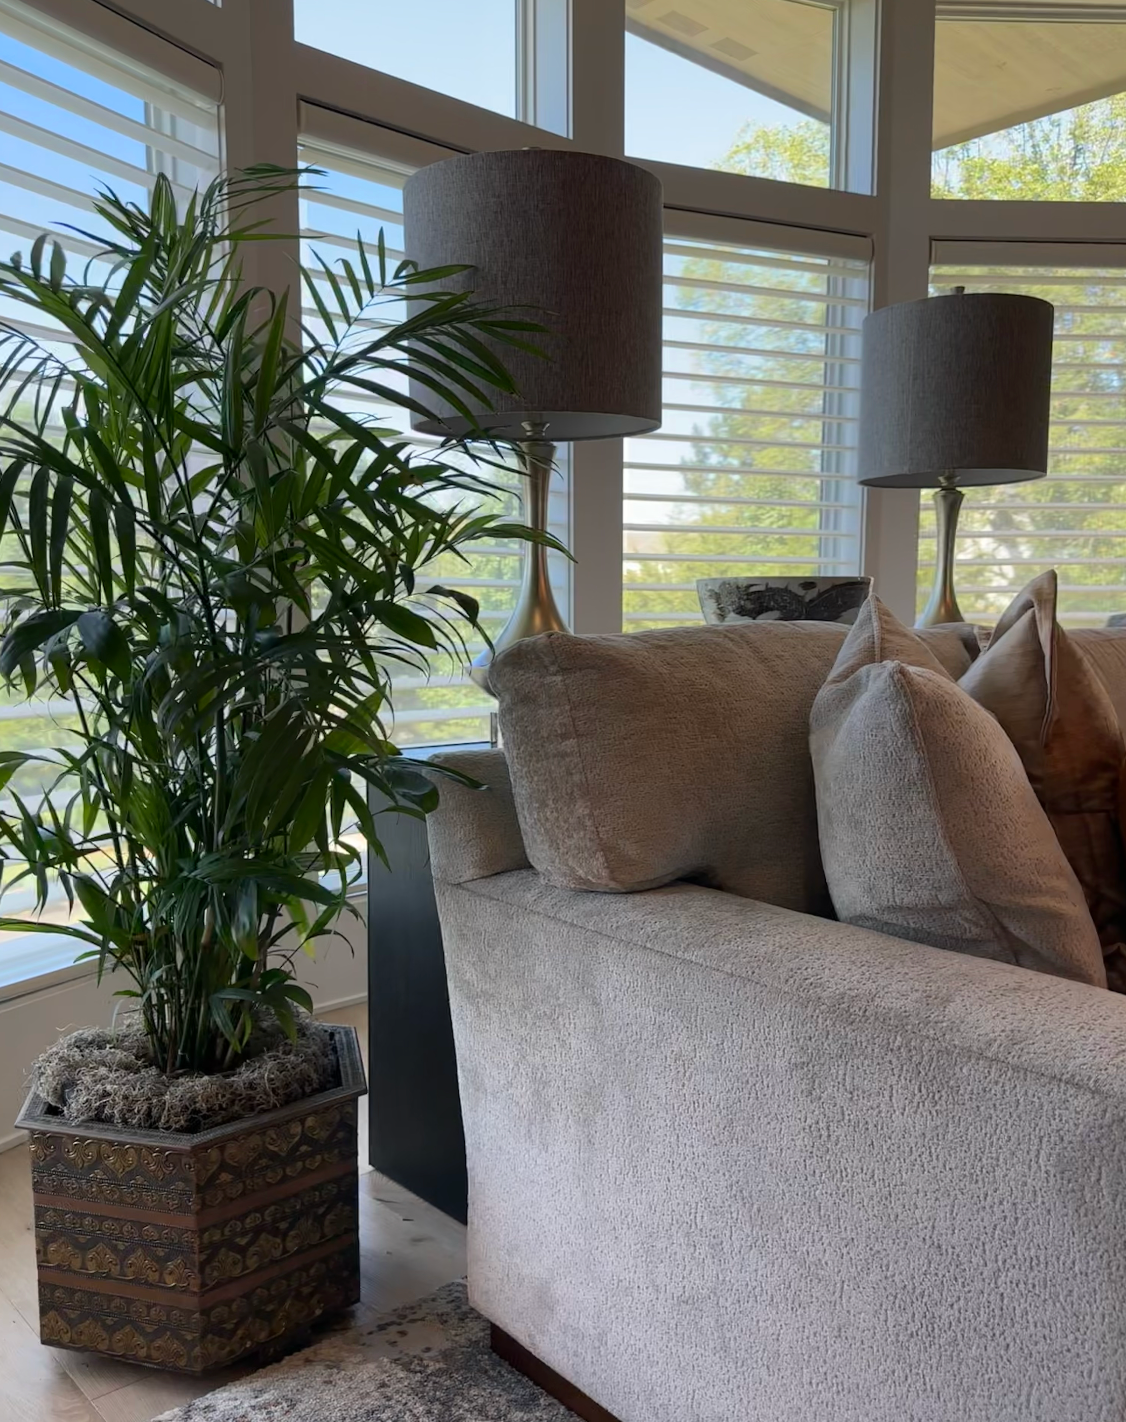 How to choose the right plant for your home